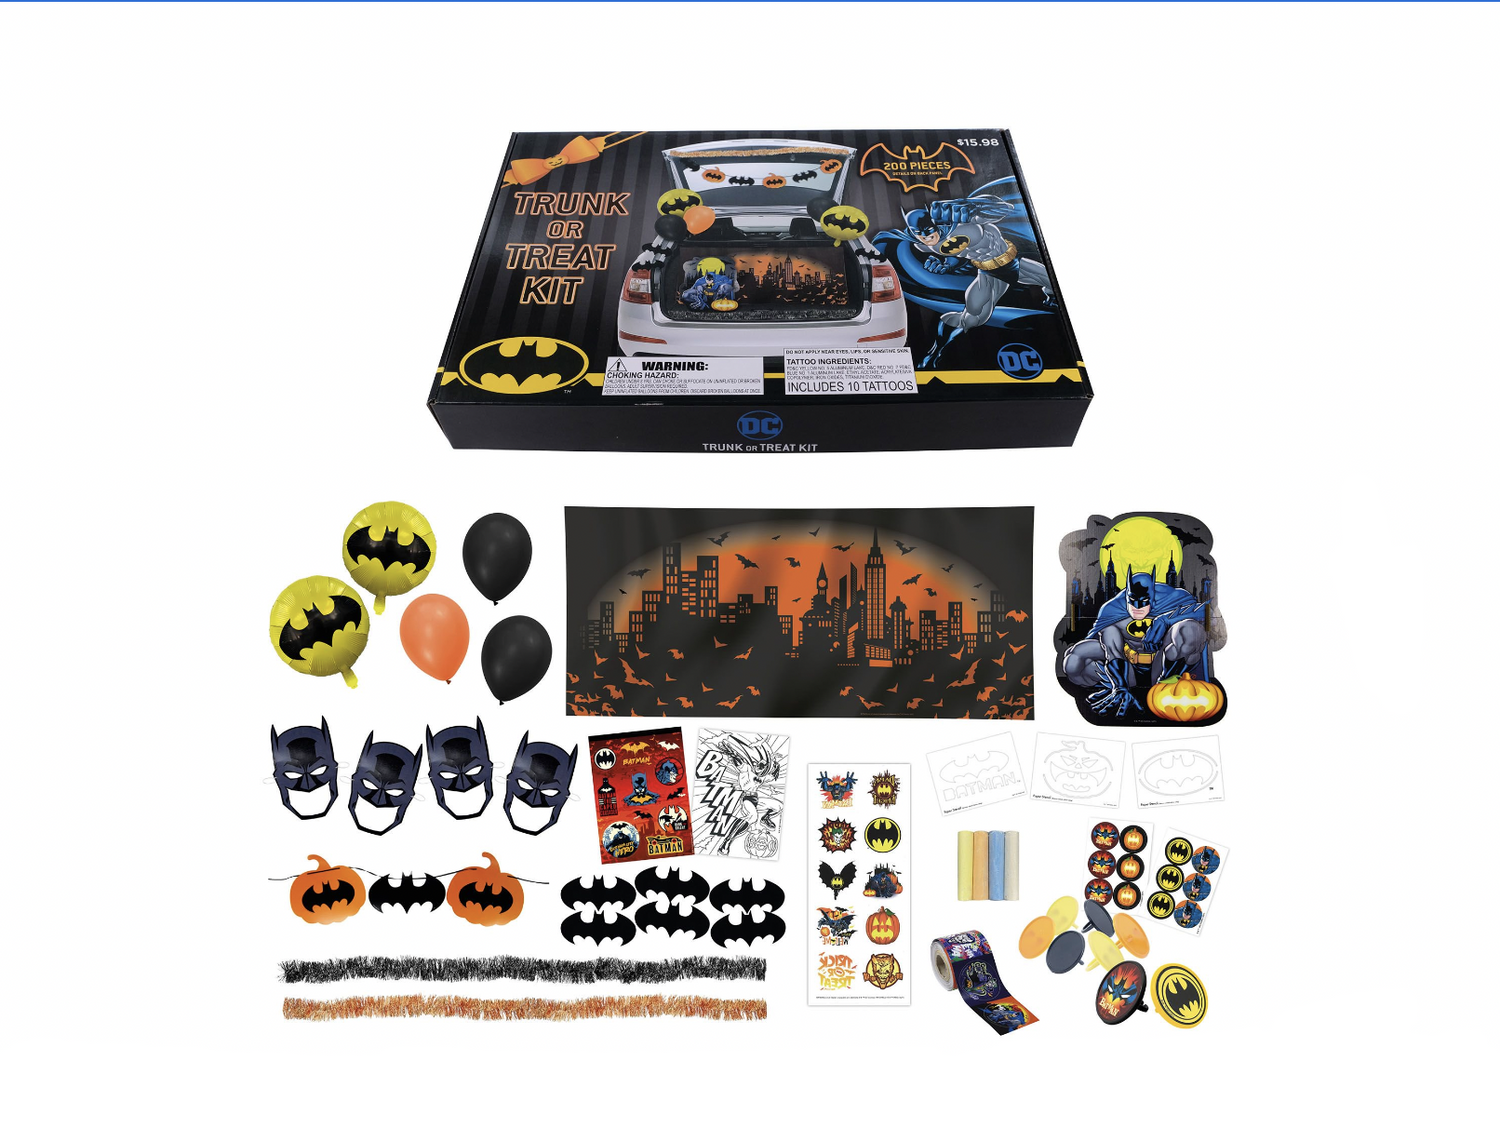 decoration  sticker  pieces  200  kit  treat  or  trunk  batman  bros  warner  shipping  accessory  halloween  costume  cosplay  gift  free shipping  trend  trending